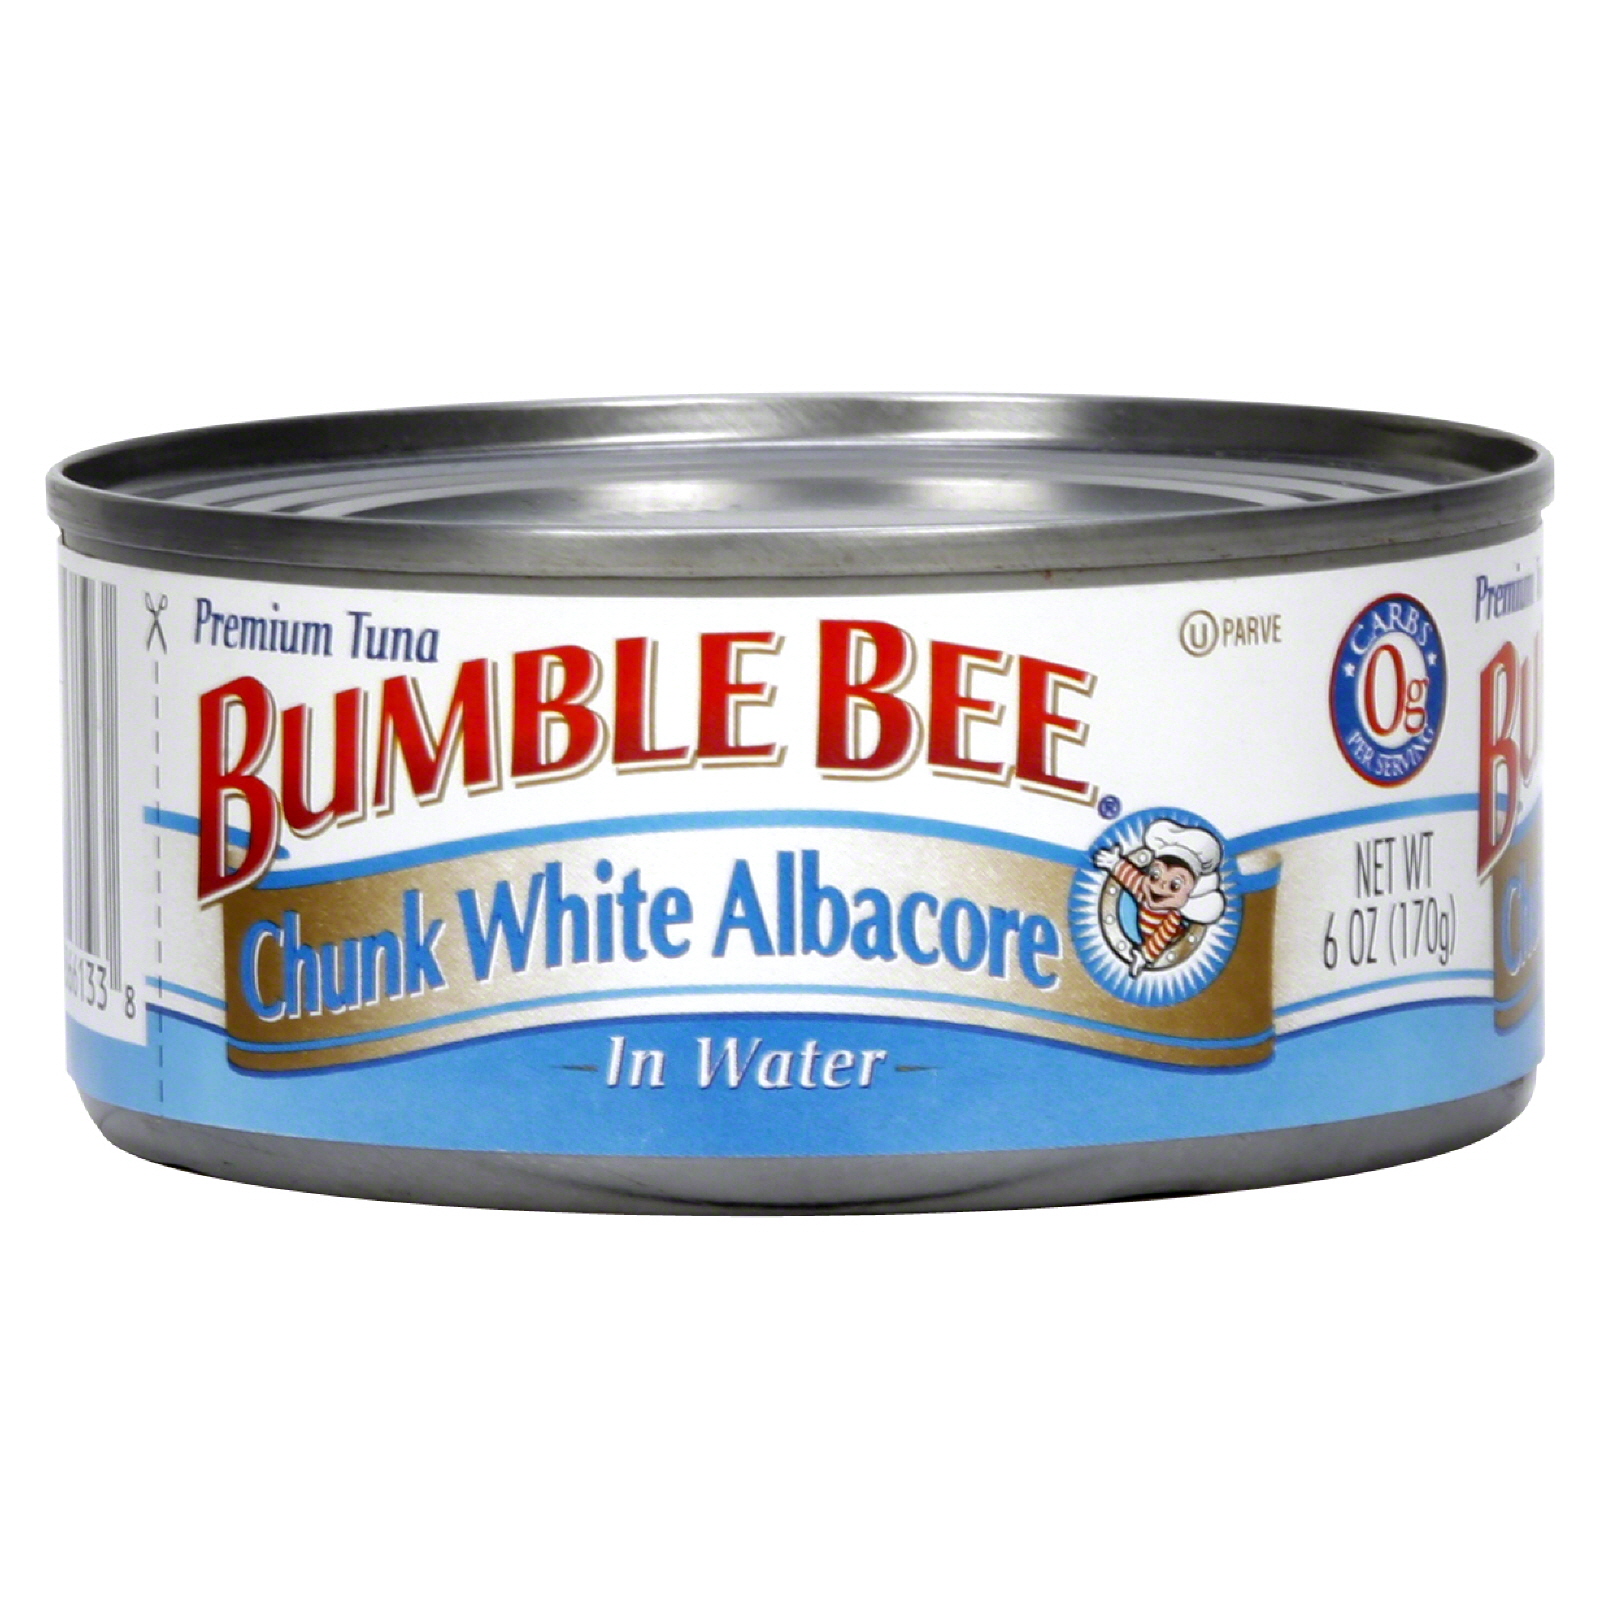 Bumble Bee Chunk White Albacore in Water, 6 oz (170 g)